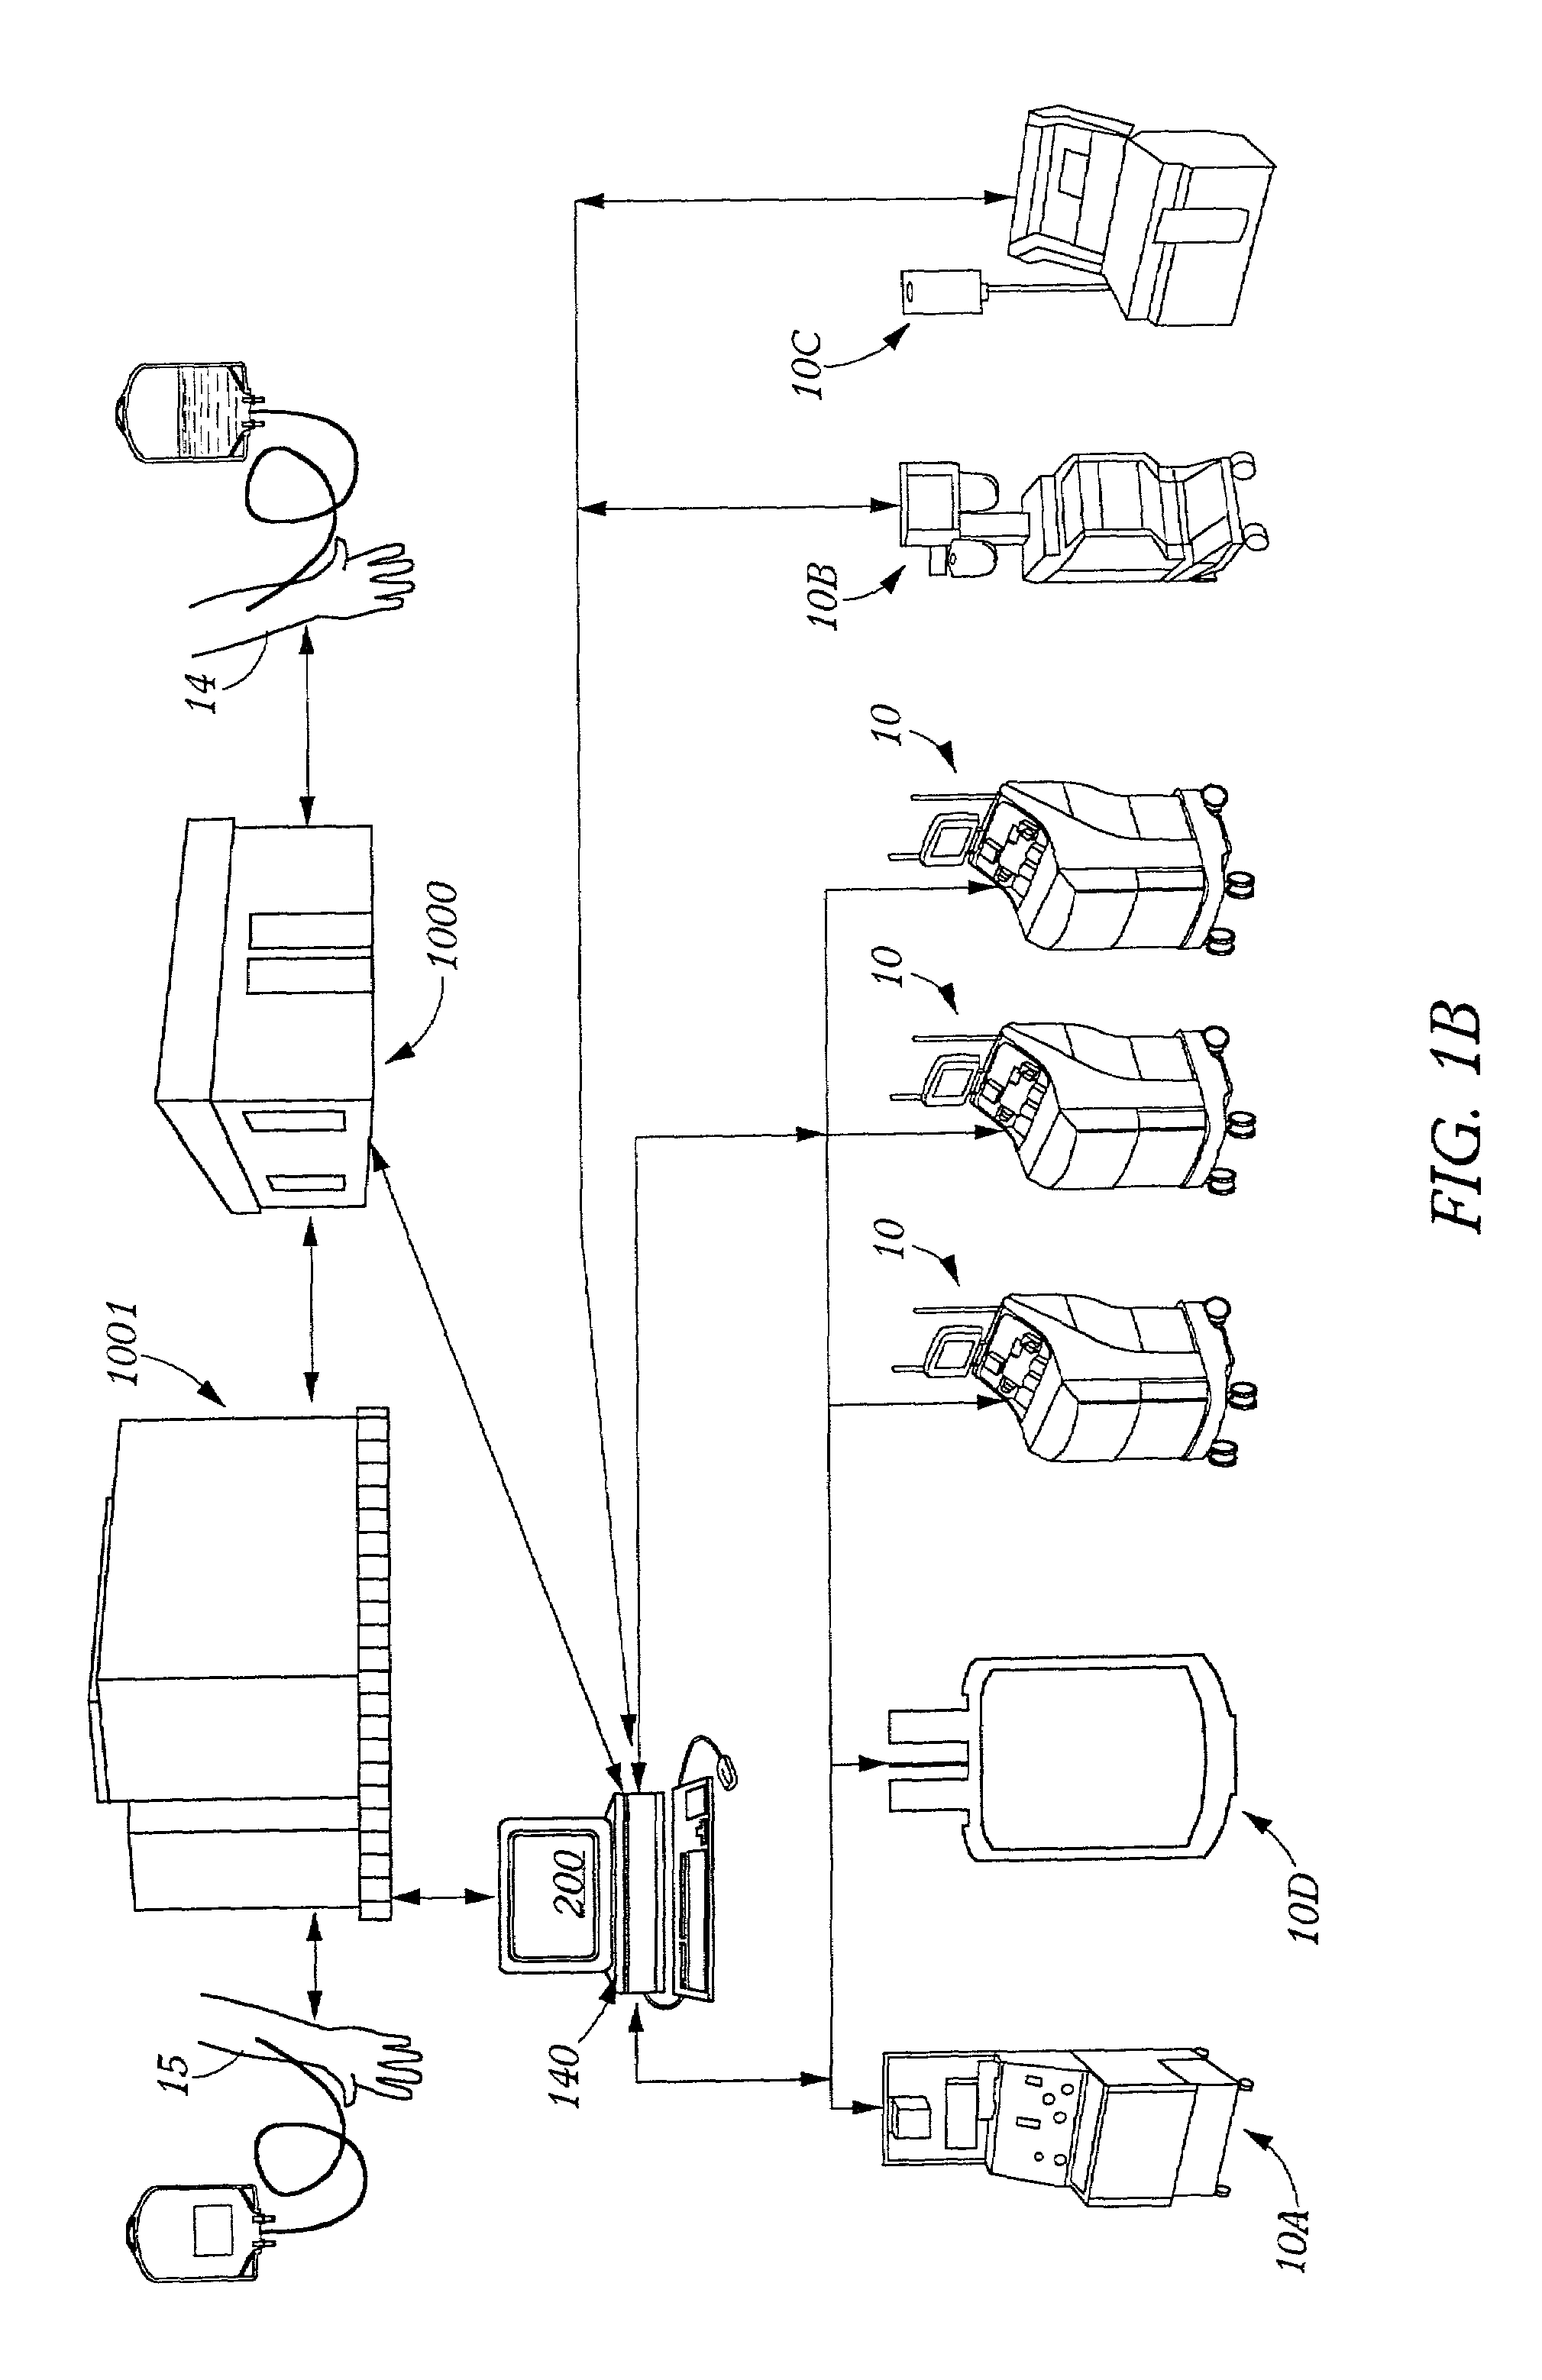 Extracorporeal blood processing information management system